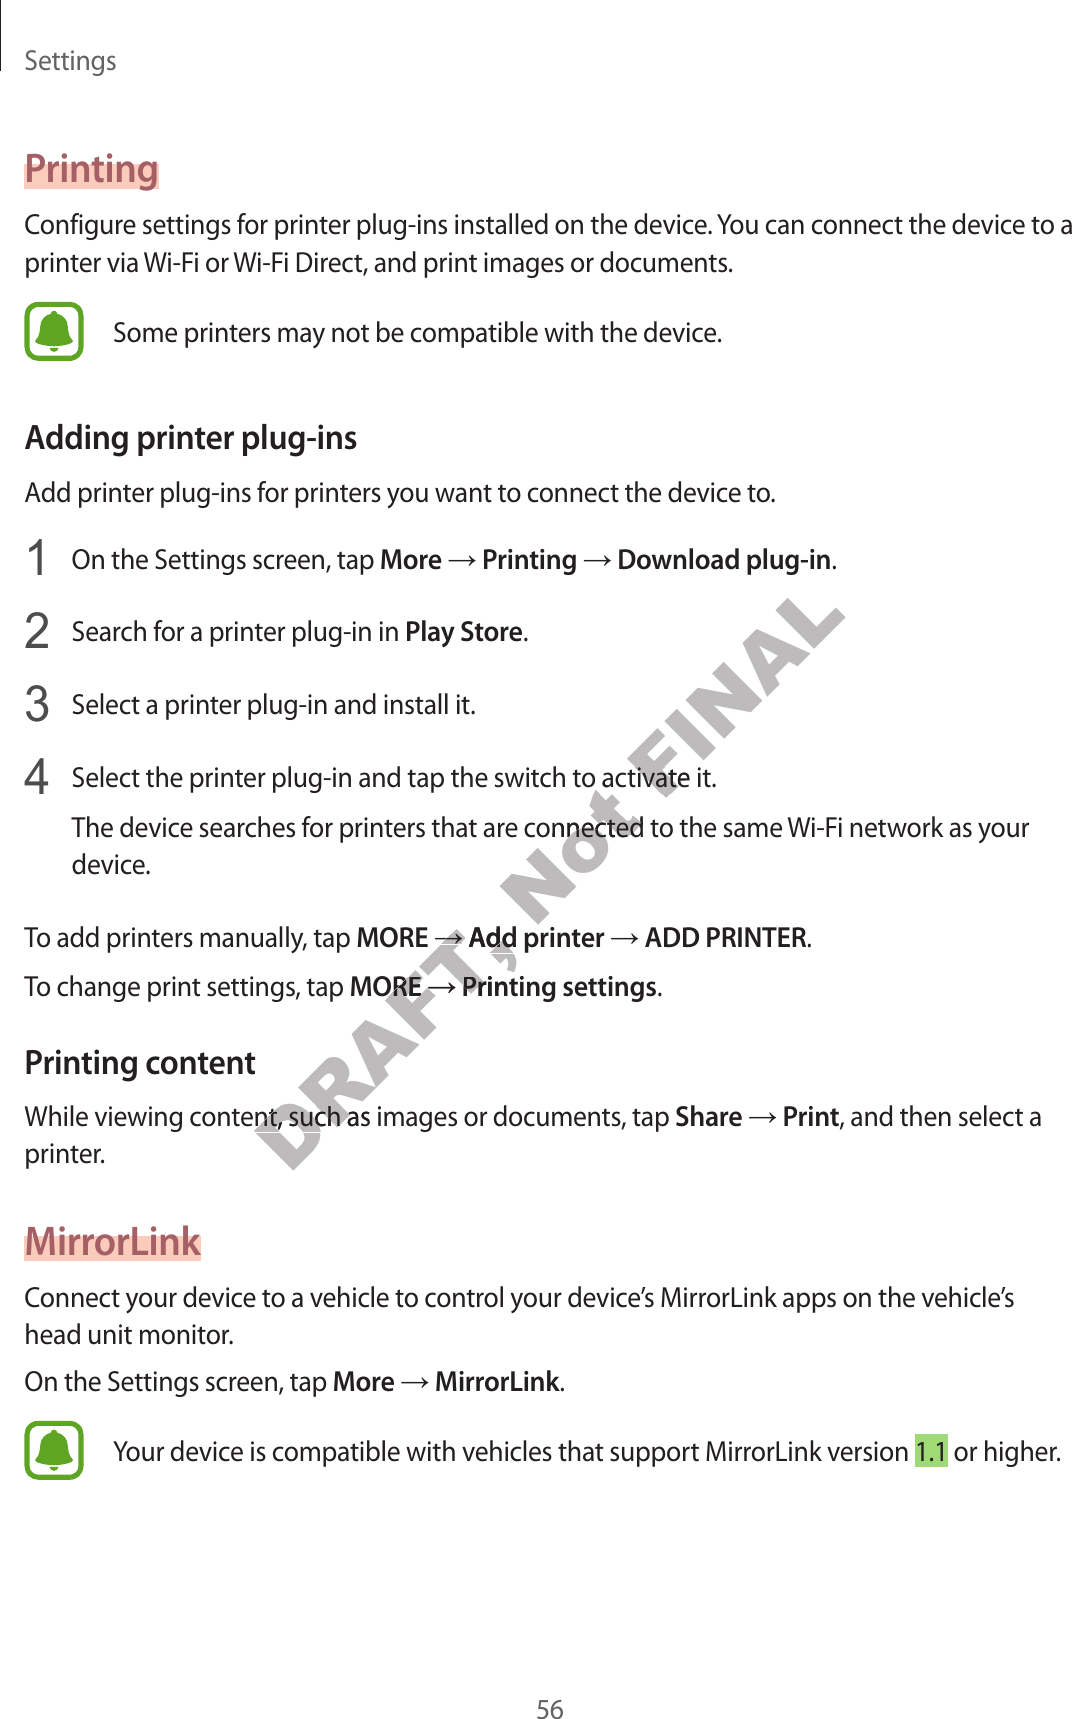 Settings56PrintingConfigur e settings f or print er plug-ins installed on the device. You can connect the device to a printer via Wi-Fi or  Wi-Fi Dir ect, and print images or documents .Some printers may not be compa tible with the device .Adding prin ter plug-insAdd print er plug-ins f or printers y ou w ant t o connect the device to.1  On the Settings screen, tap More → Printing → Download plug-in.2  Search for a print er plug-in in Play St or e.3  Select a printer plug-in and install it.4  Select the printer plug-in and tap the switch t o activate it.The device sear ches f or print ers that ar e c onnected to the same Wi-Fi network as y our device.To add printers manually, tap MORE → Add prin ter → ADD PRINTER.To change print settings, tap MORE → Printing settings.Prin ting c ont entWhile viewing cont ent , such as images or documents , tap Share → Print, and then select a printer.MirrorLinkConnect your device t o a v ehicle to c ontr ol y our devic e’s MirrorLink apps on the vehicle’s head unit monitor.On the Settings screen, tap More → MirrorLink.Your device is compatible with vehicles that support MirrorLink v ersion 1.1 or higher.DRAFT, →DRAFT, →Add prin terDRAFT, Add prin terMOREDRAFT, MORE→DRAFT, →Printing settingsDRAFT, Printing settingsWhile viewing cont ent , such as images or documents , tap DRAFT, While viewing cont ent , such as images or documents , tap Not Select the printer plug-in and tap the switch t o activate it.Not Select the printer plug-in and tap the switch t o activate it.The device sear ches f or print ers that ar e c onnected to the same Not The device sear ches f or print ers that ar e c onnected to the same FINALSelect the printer plug-in and tap the switch t o activate it.FINALSelect the printer plug-in and tap the switch t o activate it.